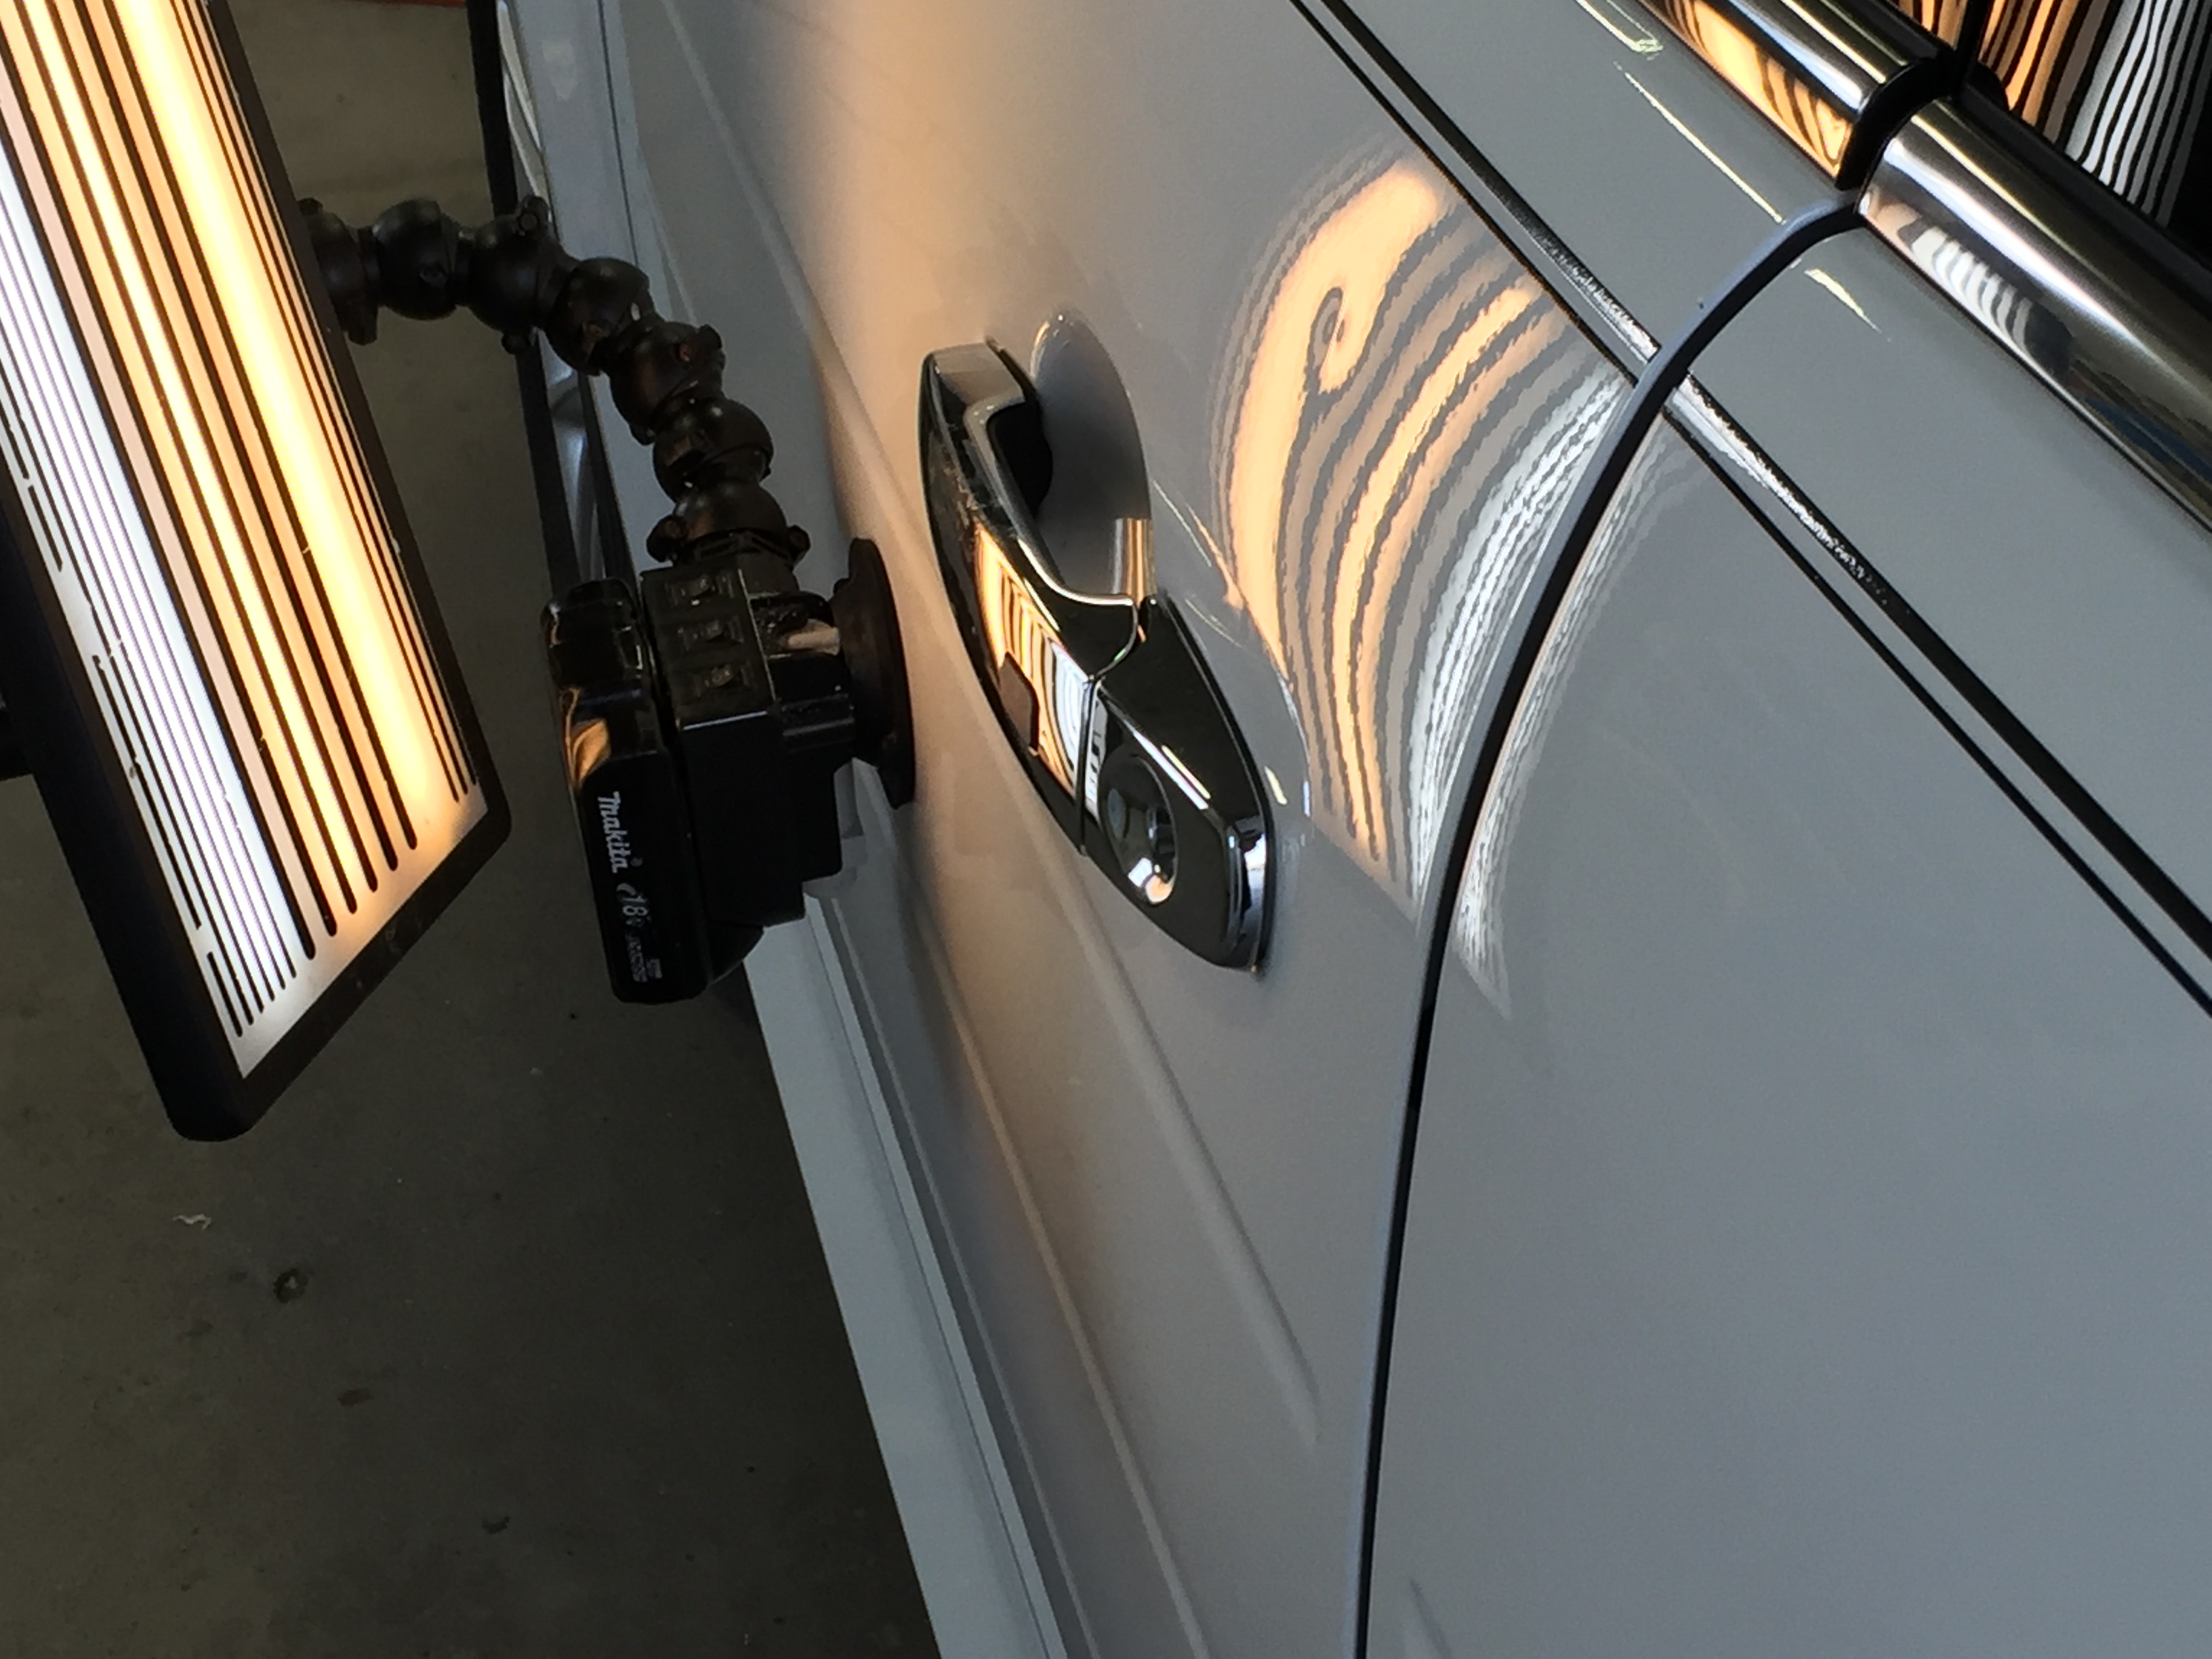 2015 Ford Flex, Dent Removal in the drivers door, Image's of before during and after this dent removal process. Paintless Dent Repair, Springfield, IL, http://217dent.com